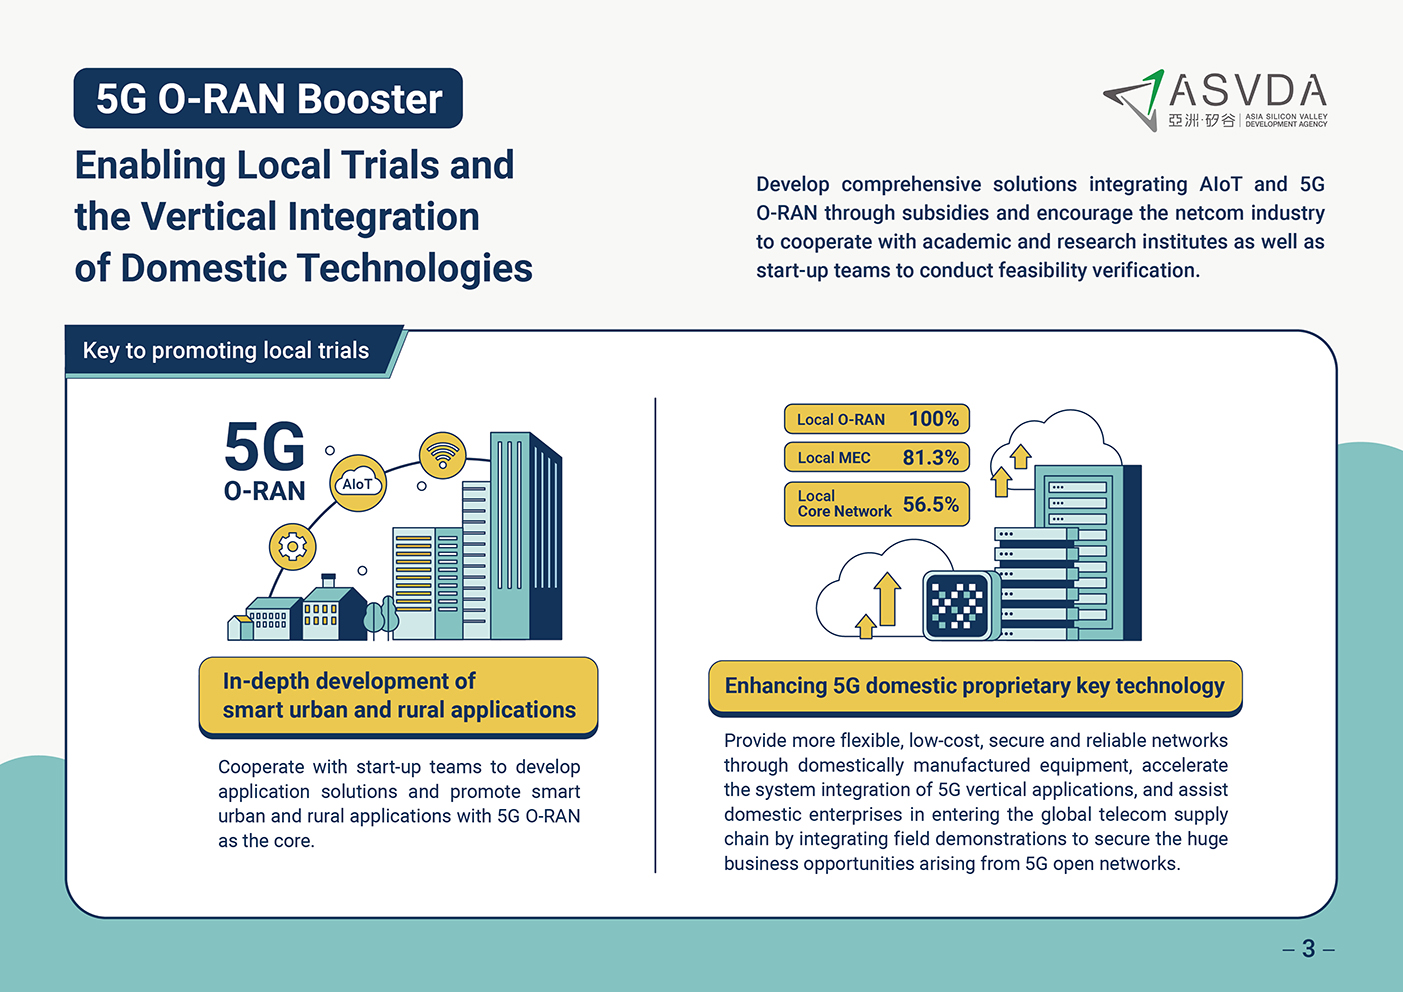 Enabling Local Trials and the Vertical Integration of Domestic Technologies